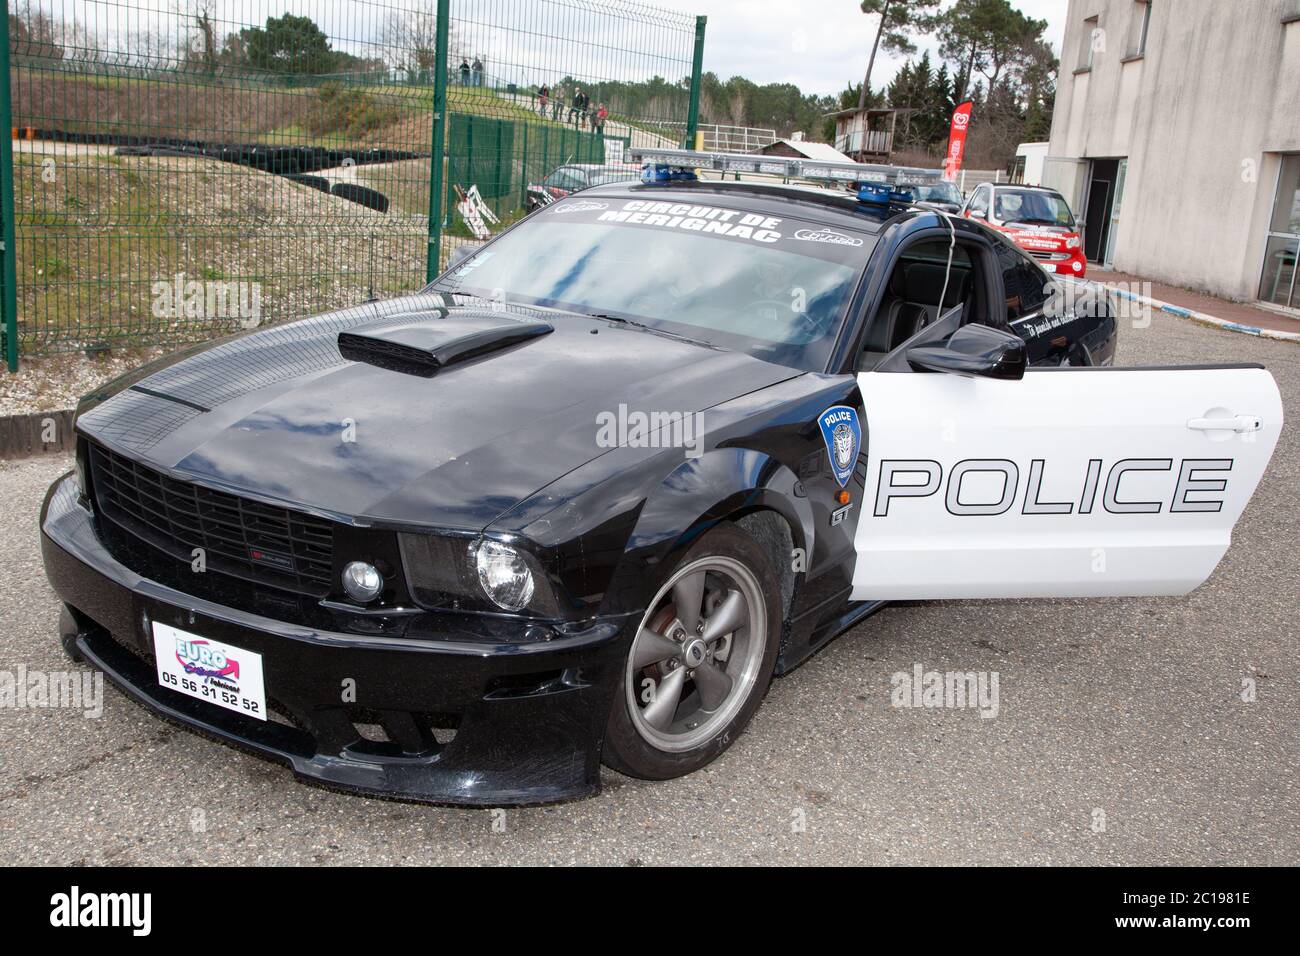 Bordeaux , Aquitaine / France - 06 10 2020 : Ford Mustang police car black and white replica of Decepticon in disney Transformers Film Stock Photo